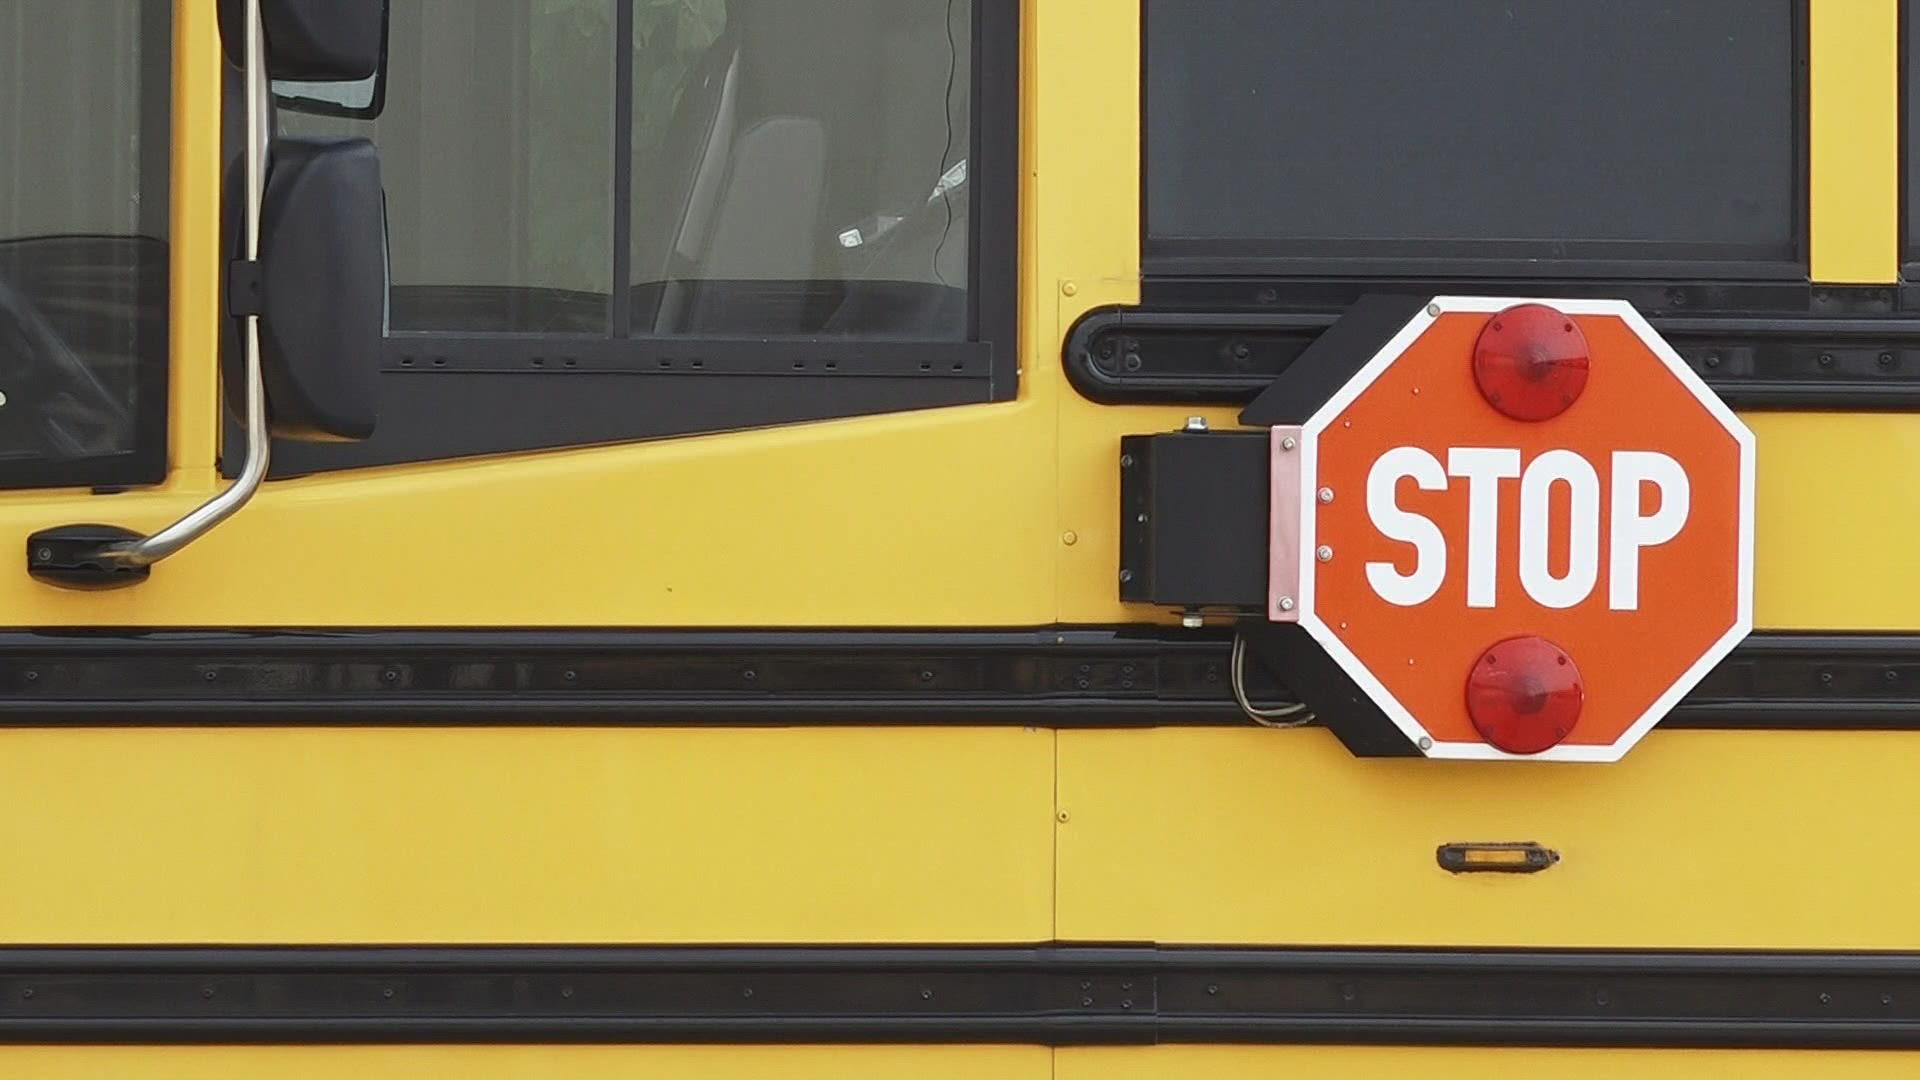 If you pass a stopped school bus you could face a fine of up to $500 and may also be required to complete 100 hours of community service.